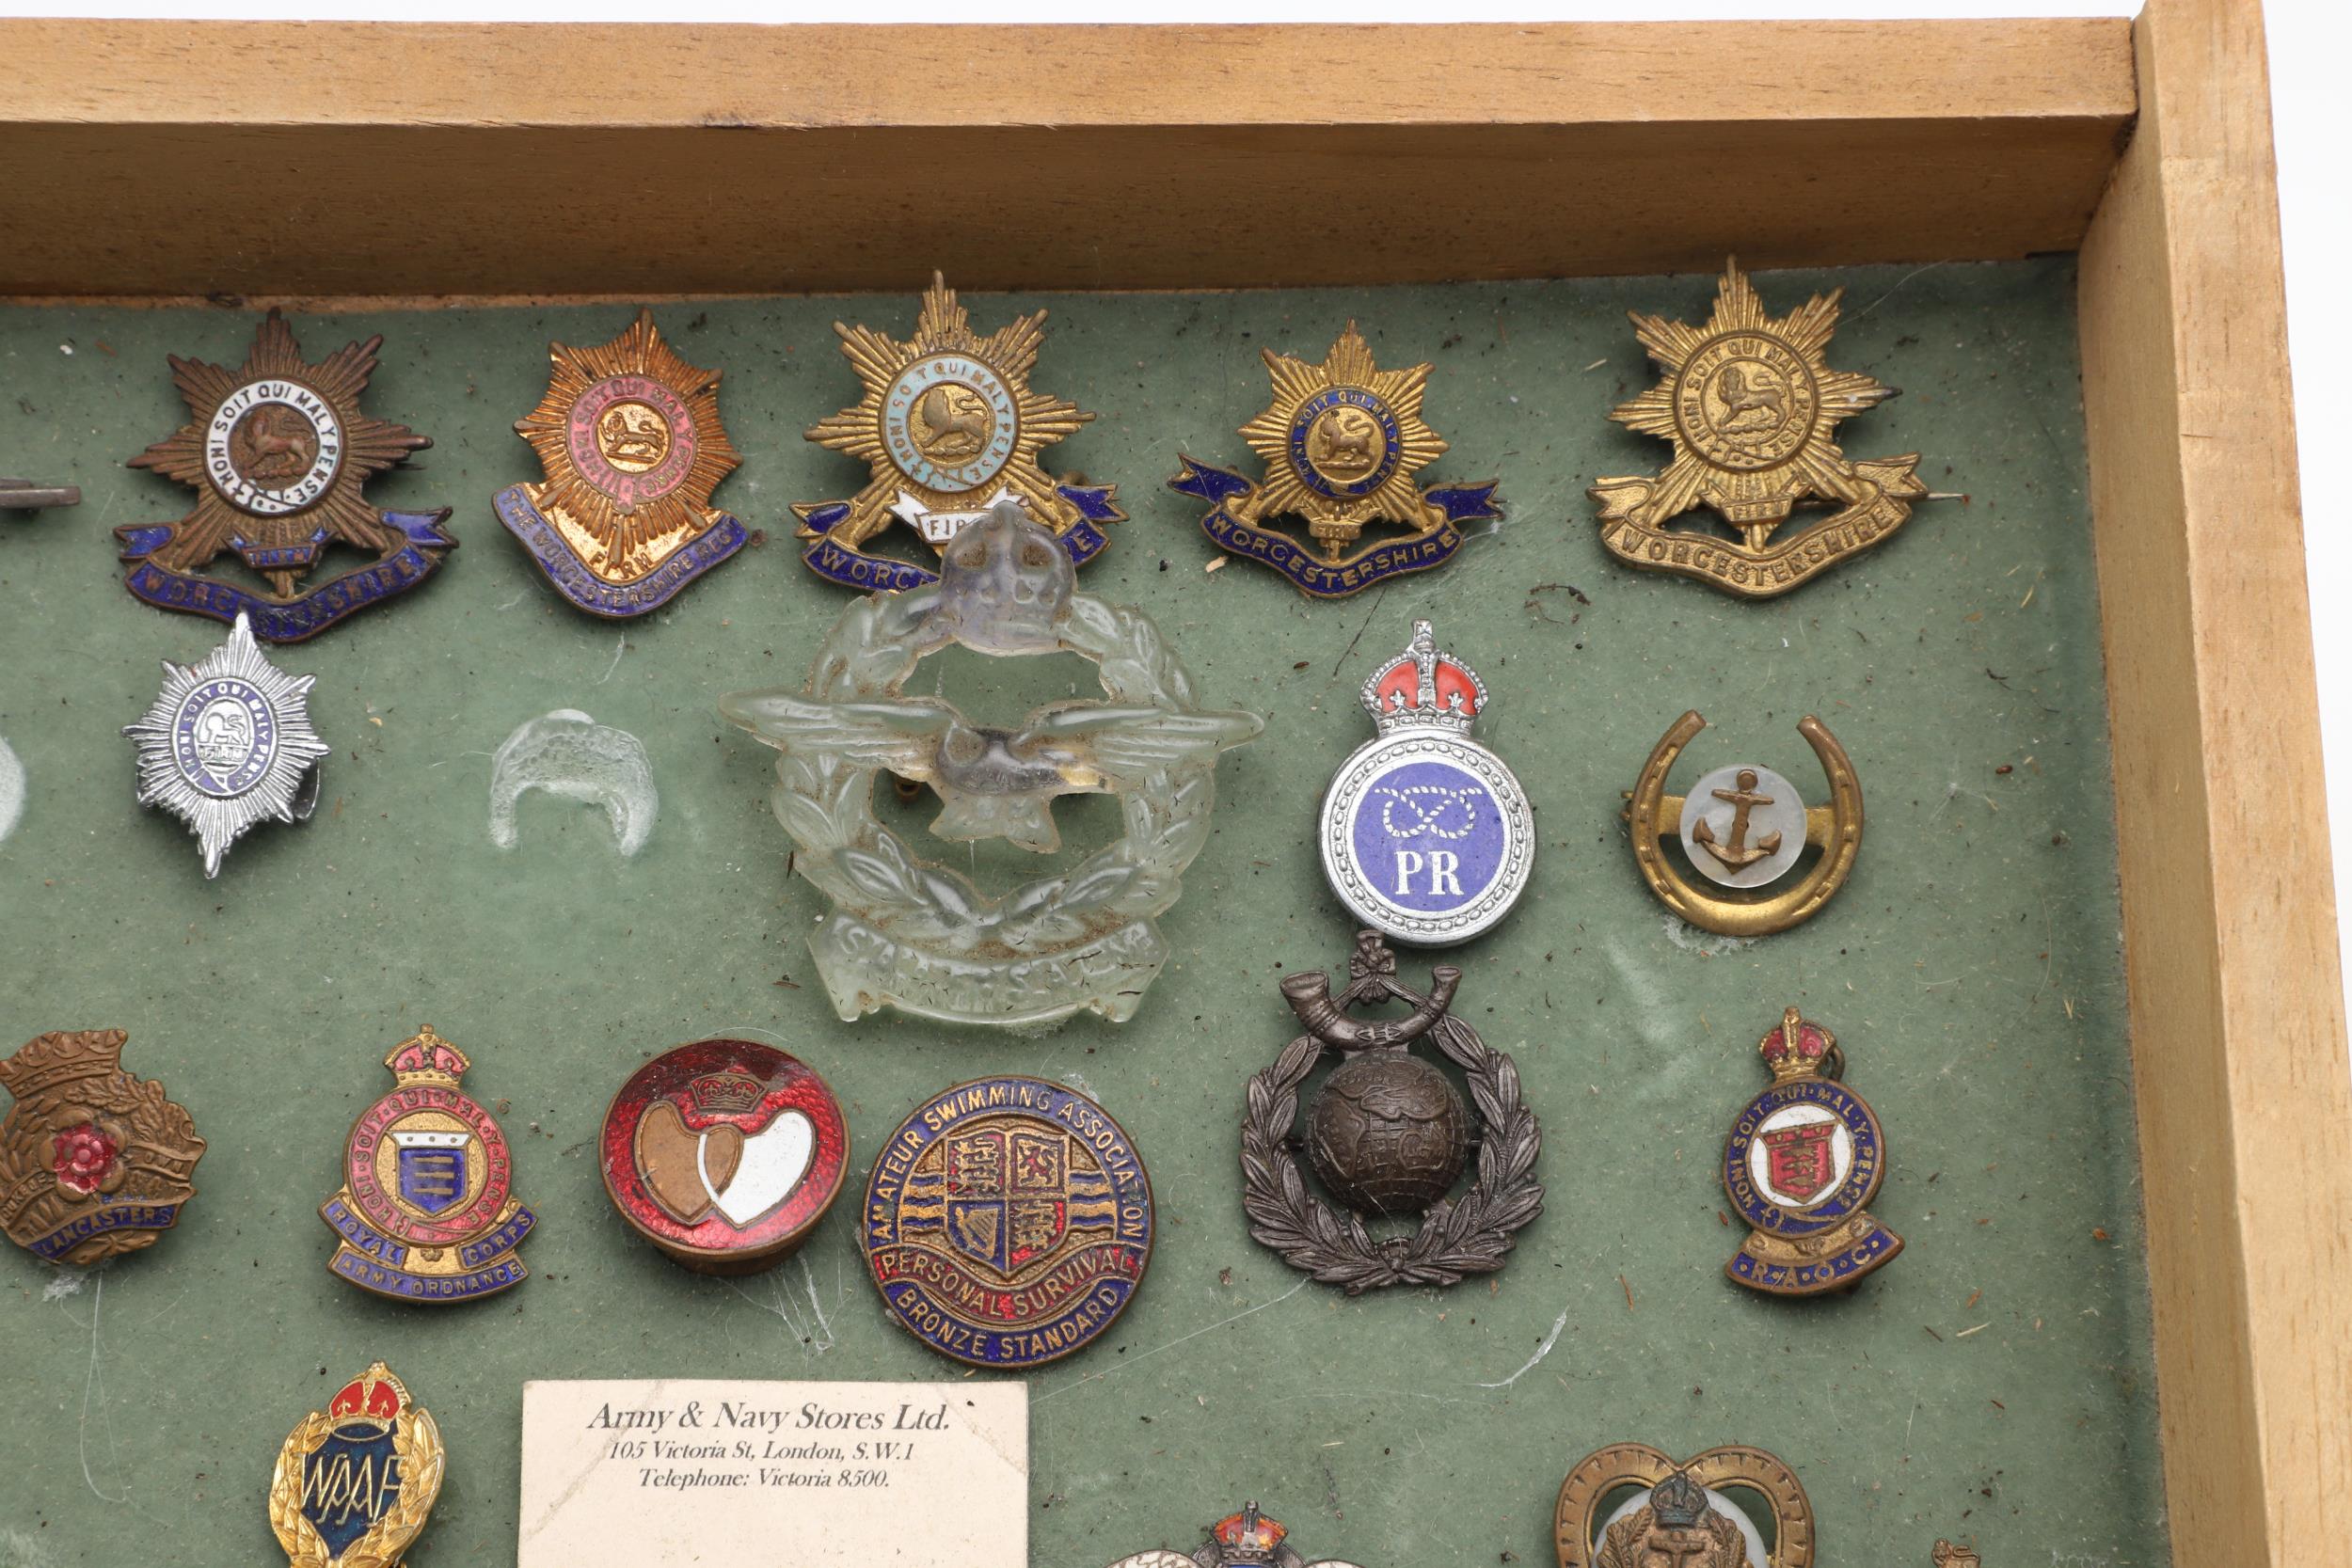 AN INTERESTING COLLECTION OF SWEETHEART AND SIMILAR ENAMEL AND OTHER BADGES. - Image 4 of 14